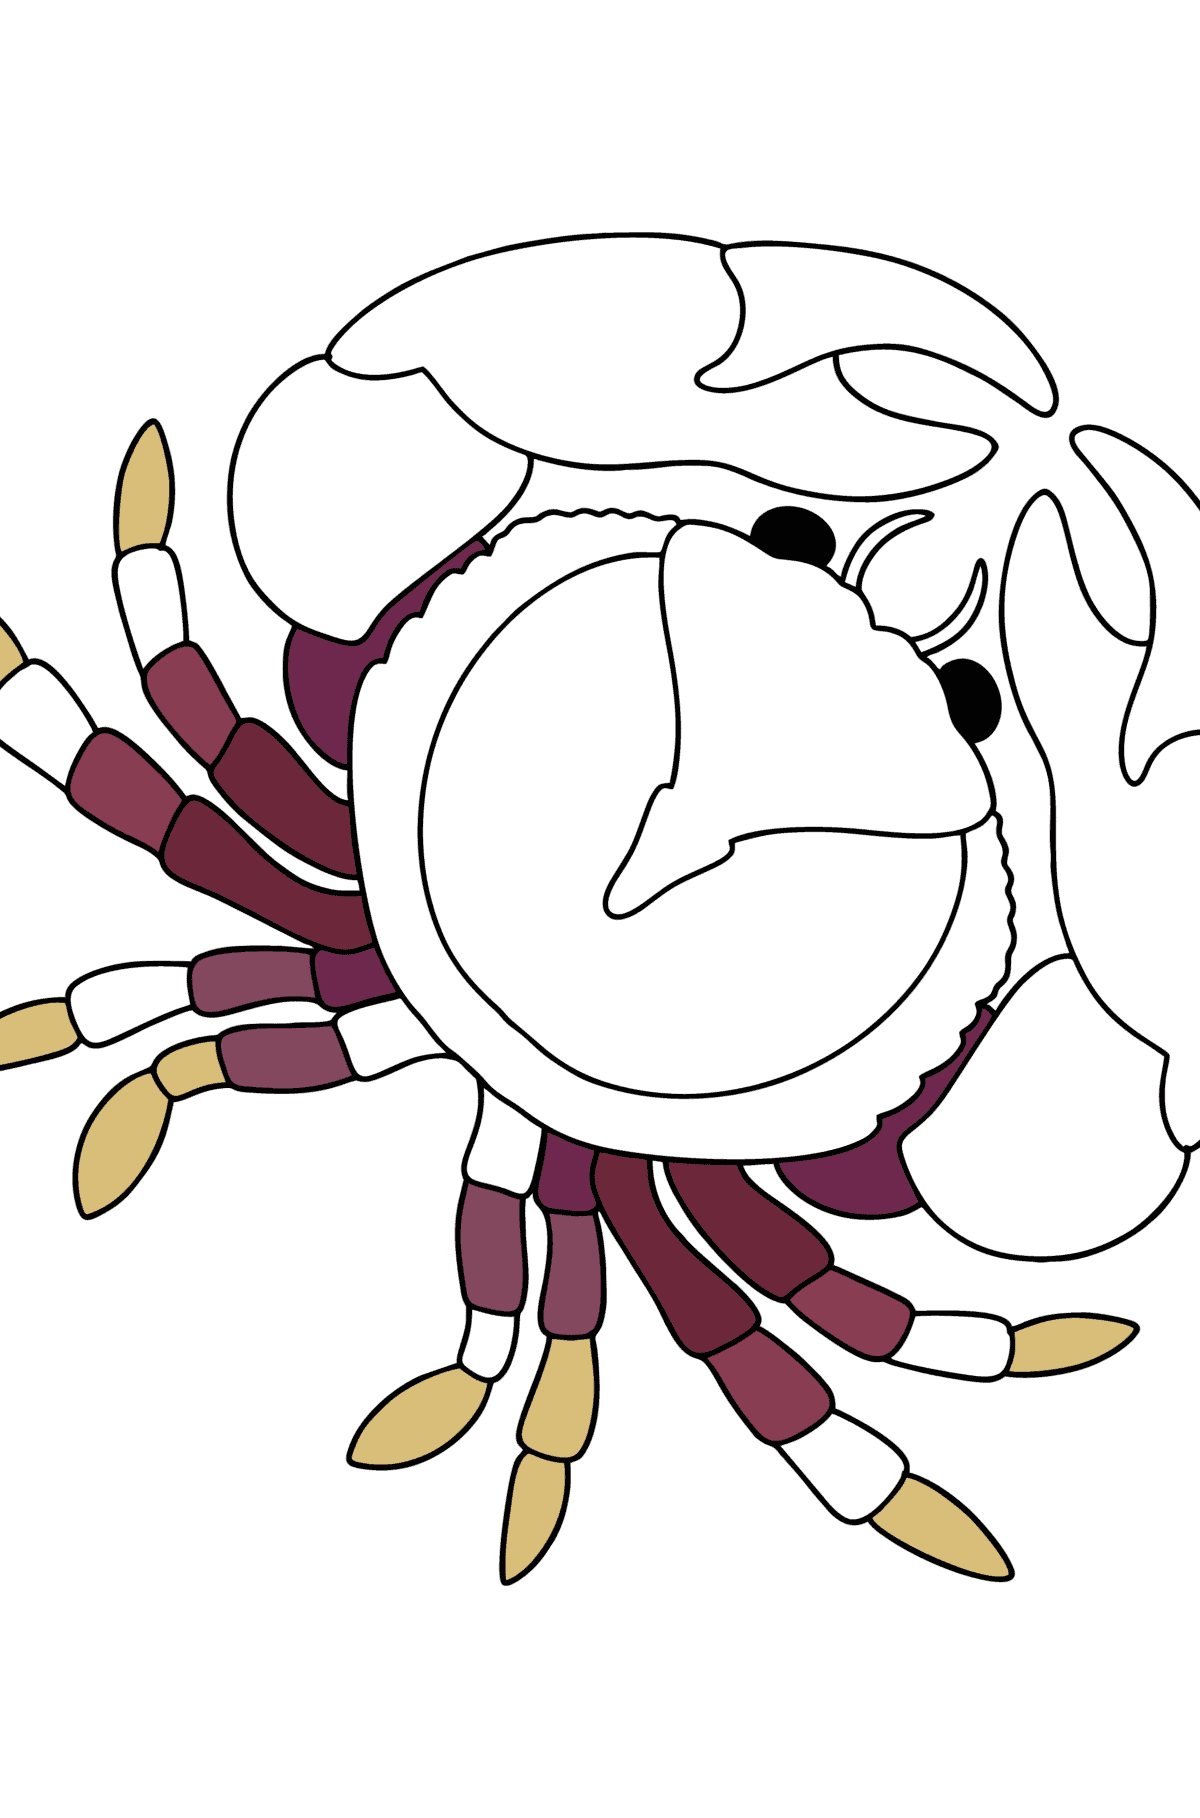 Sea ​​crab coloring page - Coloring Pages for Kids